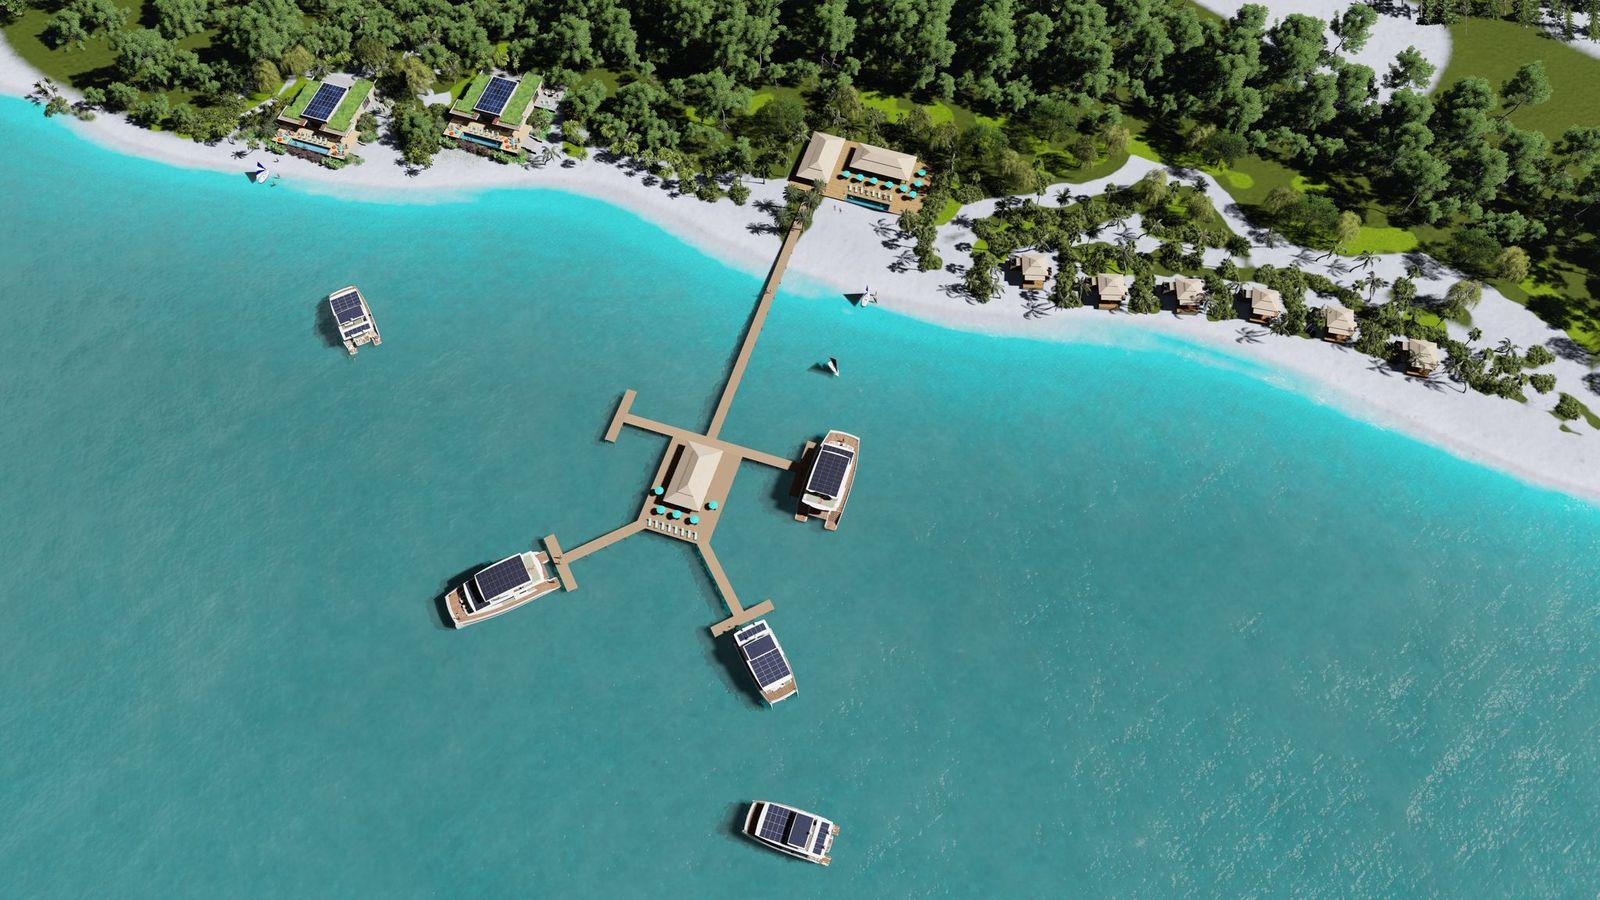 Silent-Yachts launches a unique solar powered resort solution